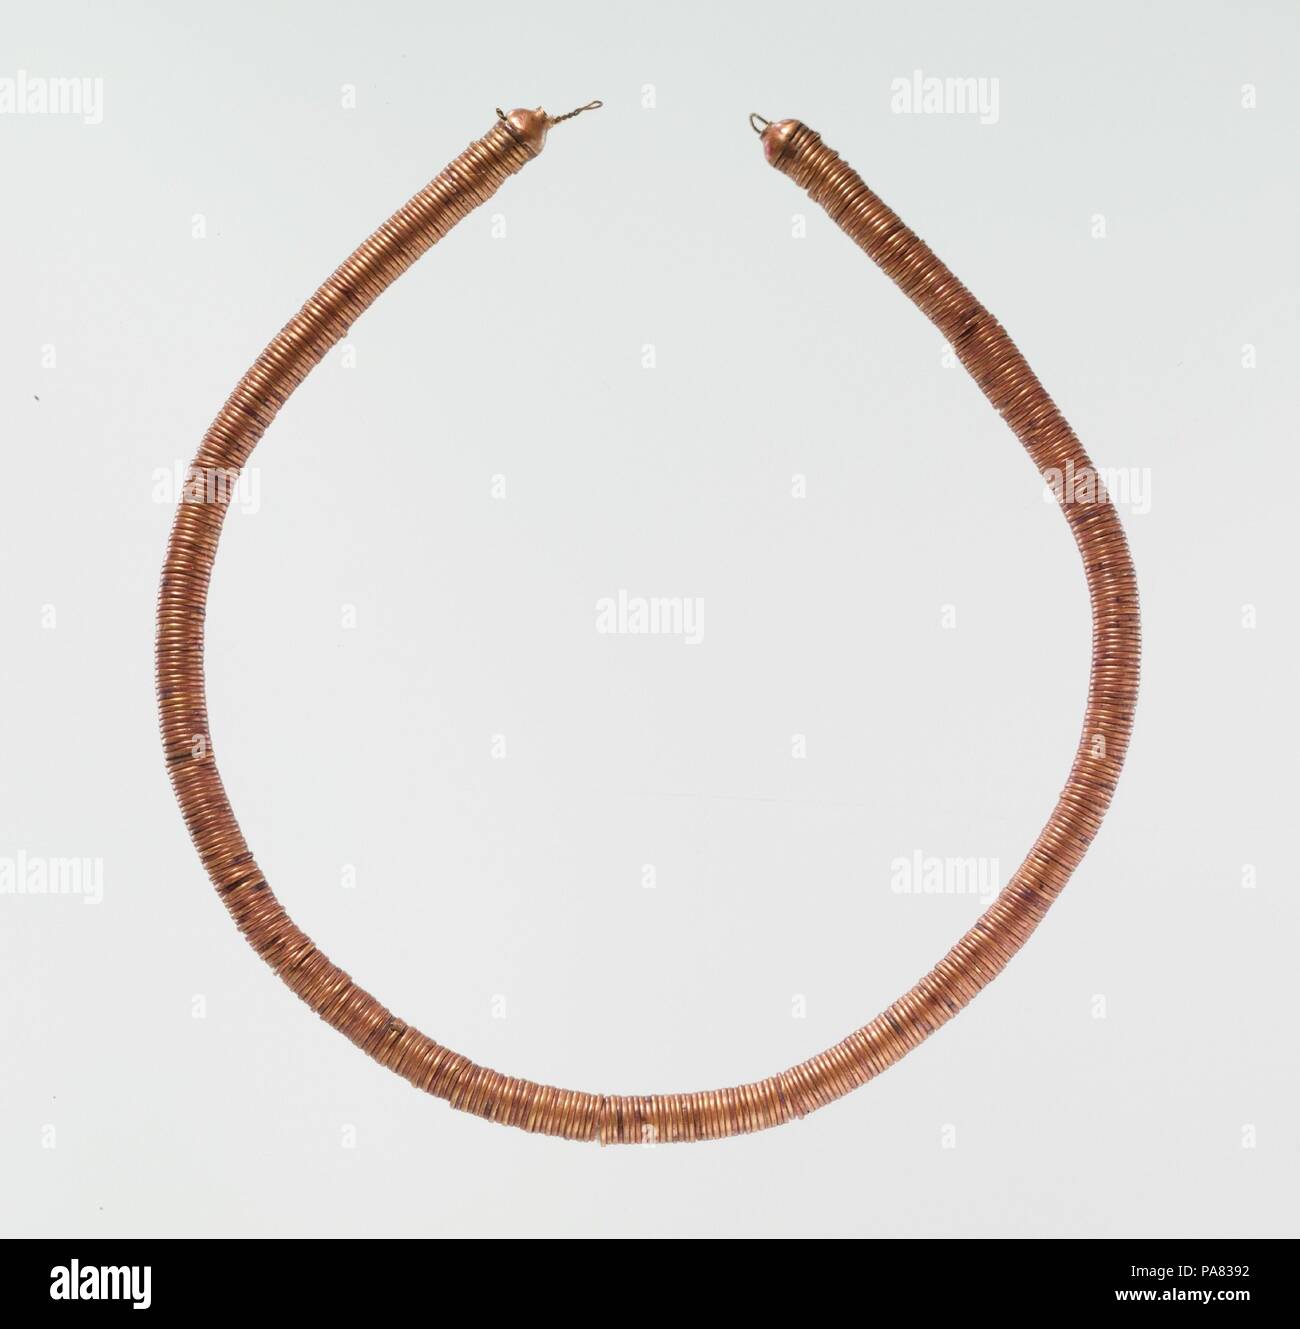 Choker of Gold Rings. Dimensions: L. 33.5 cm (13 3/16 in); rings d. 0.6 cm (1/4 in). Dynasty: Dynasty 17-Early Dynasty 18. Date: ca. 1635-1458 B.C..  Chokers like this one are uncommon and seem to come from around Thebes; the earliest example is from a Dynasty 11 (ca. 2040 B.C.) burial. By the beginning of Dynasty 18, they were worn in multiple strings. These short necklaces are often referred to as shebiu, even though they do not resemble the traditional necklaces of lentoid beads called shebiu collars that the king awarded courtiers. Furthermore, several examples come from female burials and Stock Photo